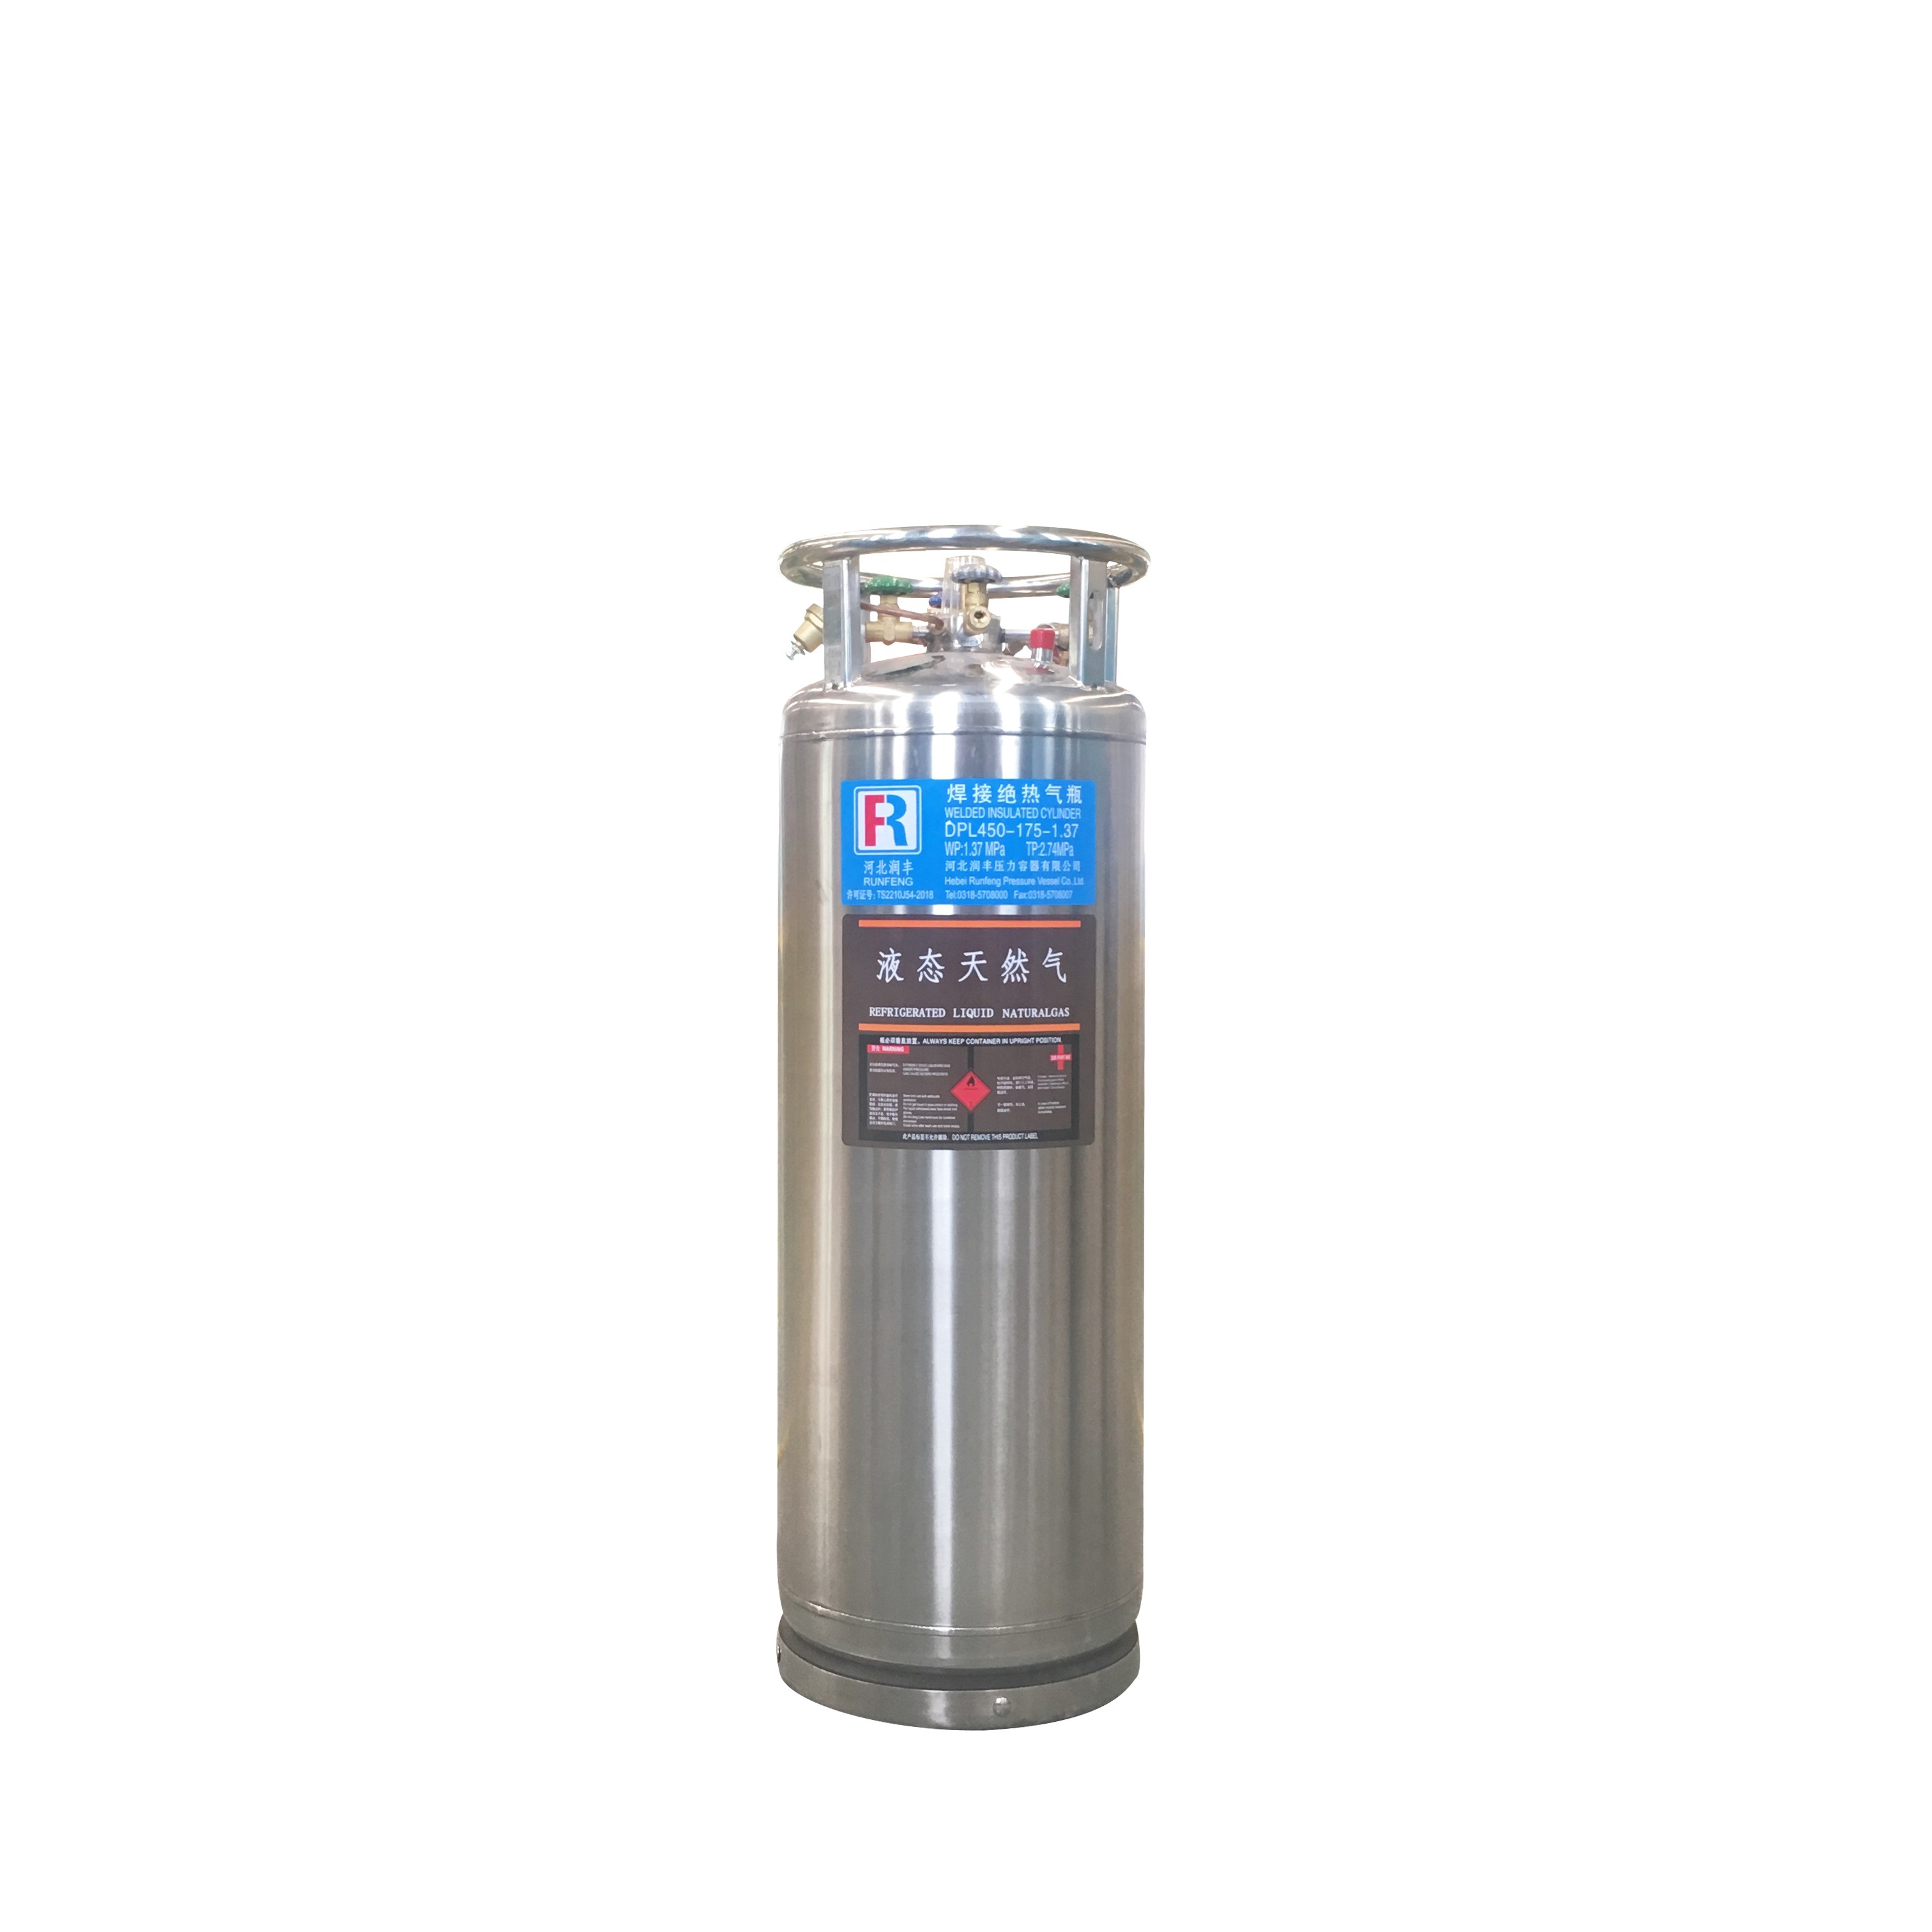 Vertical Welded Insulated Liquefied Natural Gas Cylinder 175L-1.37MPa